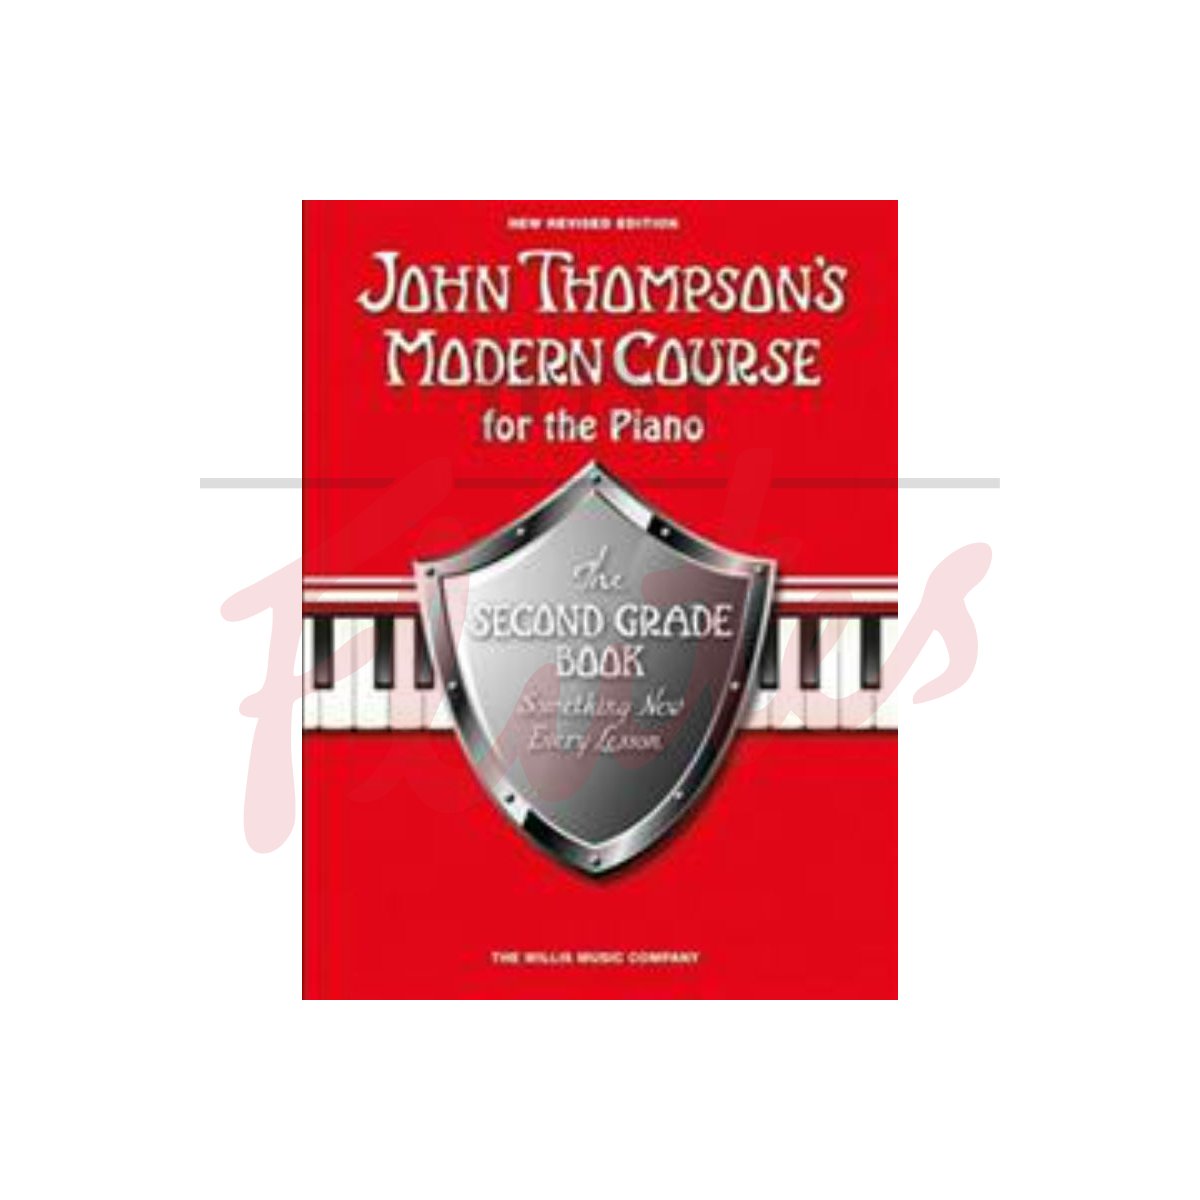 John Thompson's Modern Course for the Piano - Second Grade